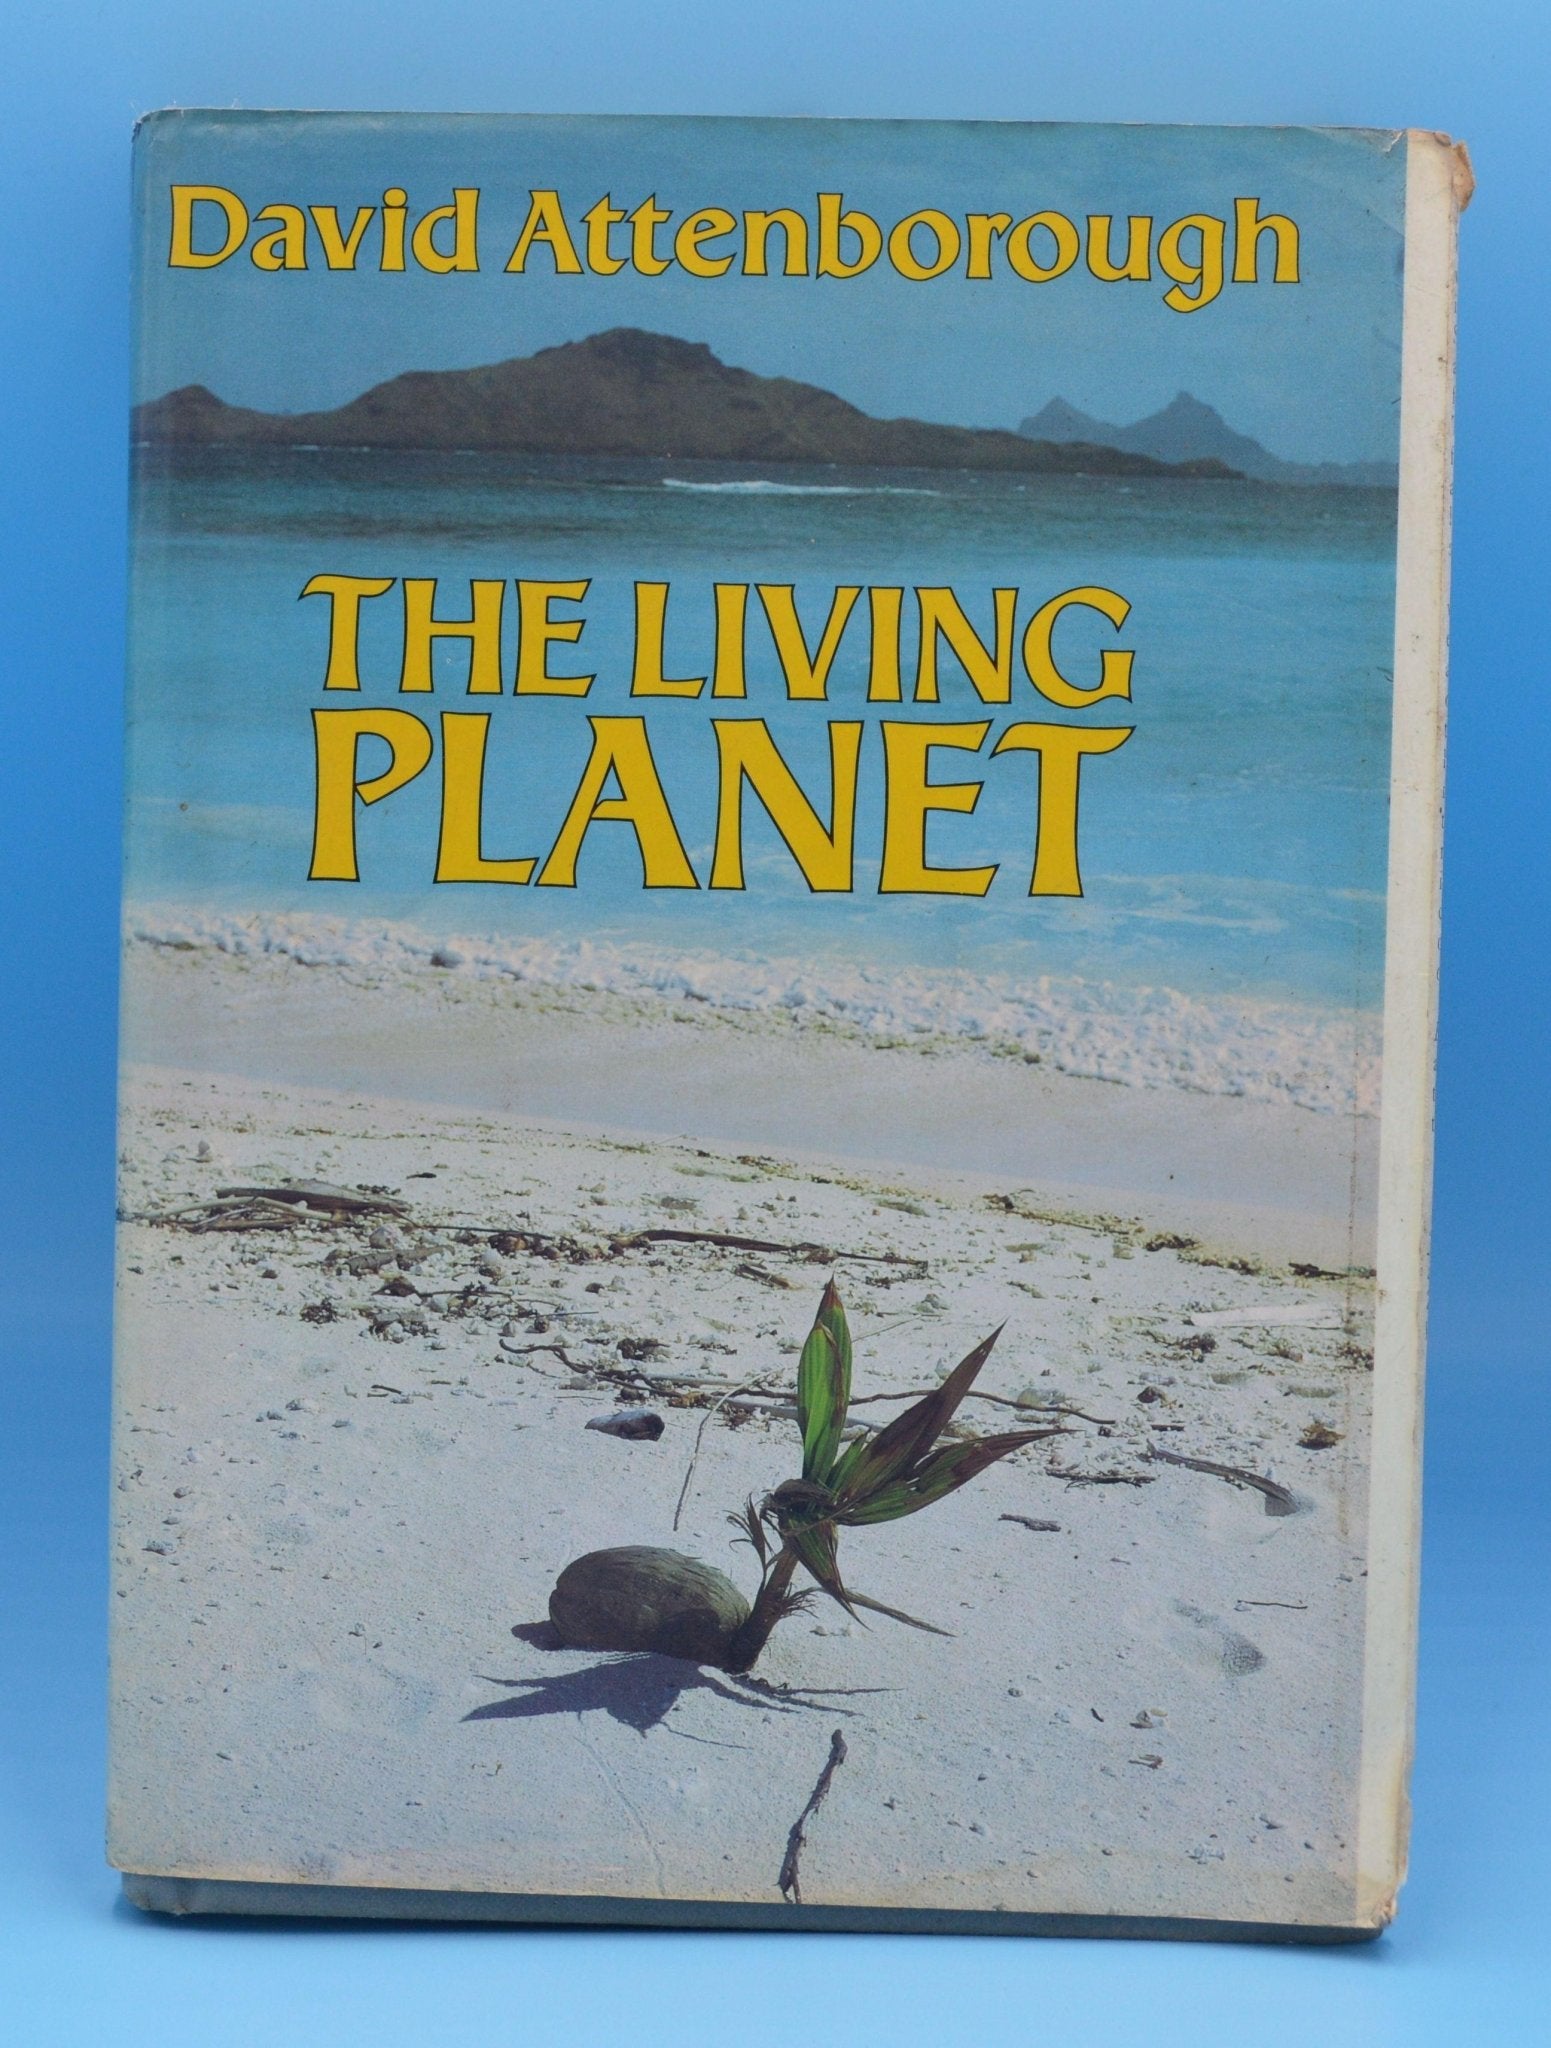 SECONDHAND BOOK THE LIVING PLANET DAVID ATTENBOROUGH - TMD167207